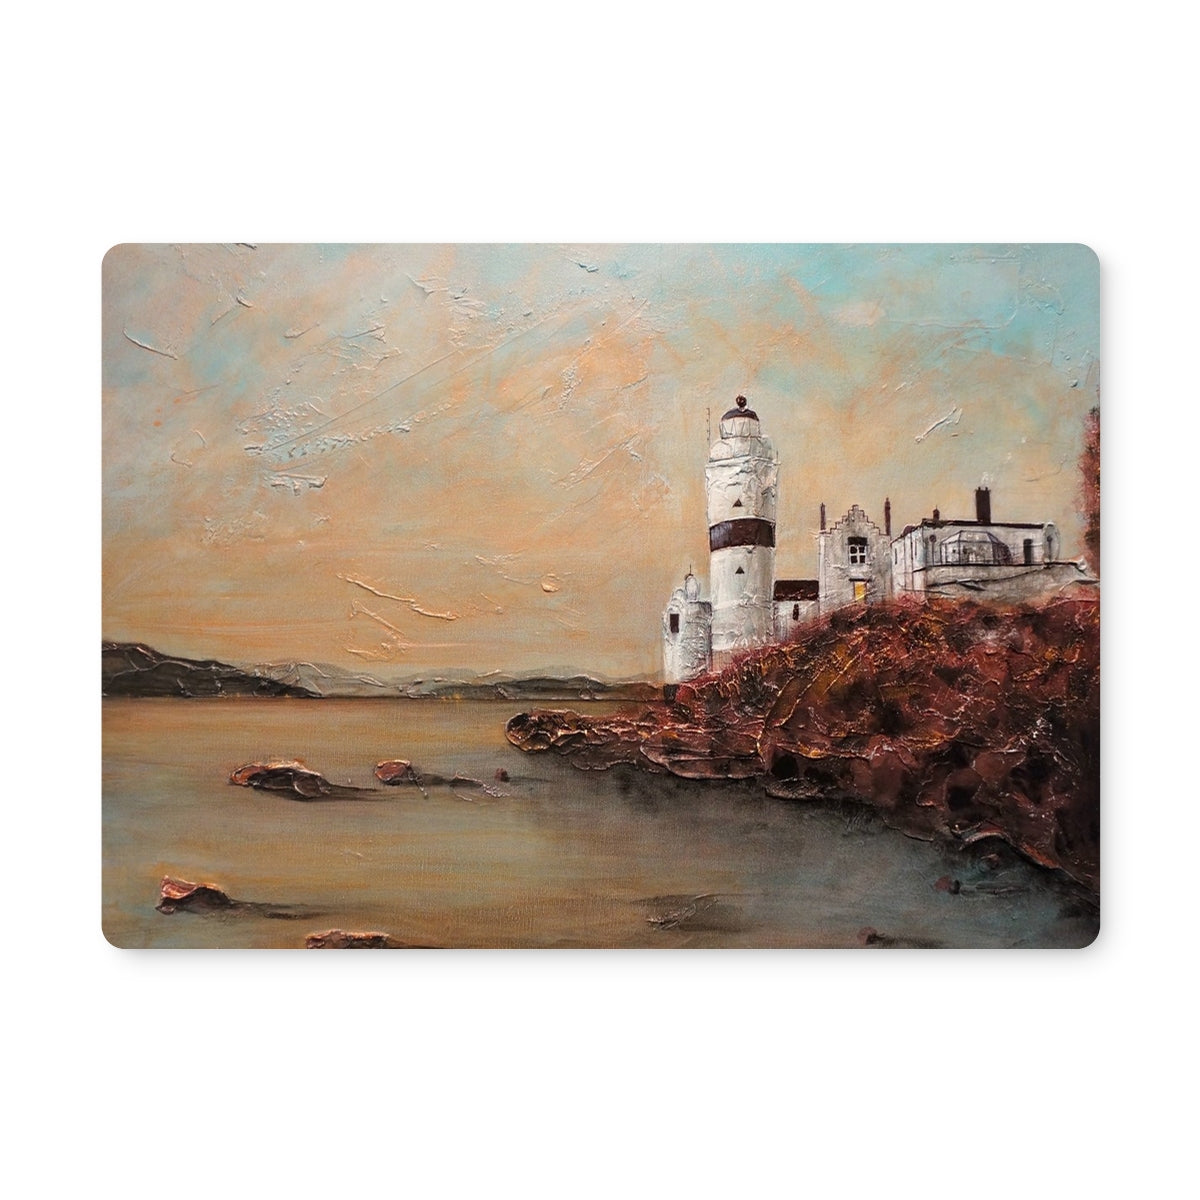 Cloch Lighthouse Dawn Art Gifts Placemat-Placemats-River Clyde Art Gallery-Single Placemat-Paintings, Prints, Homeware, Art Gifts From Scotland By Scottish Artist Kevin Hunter